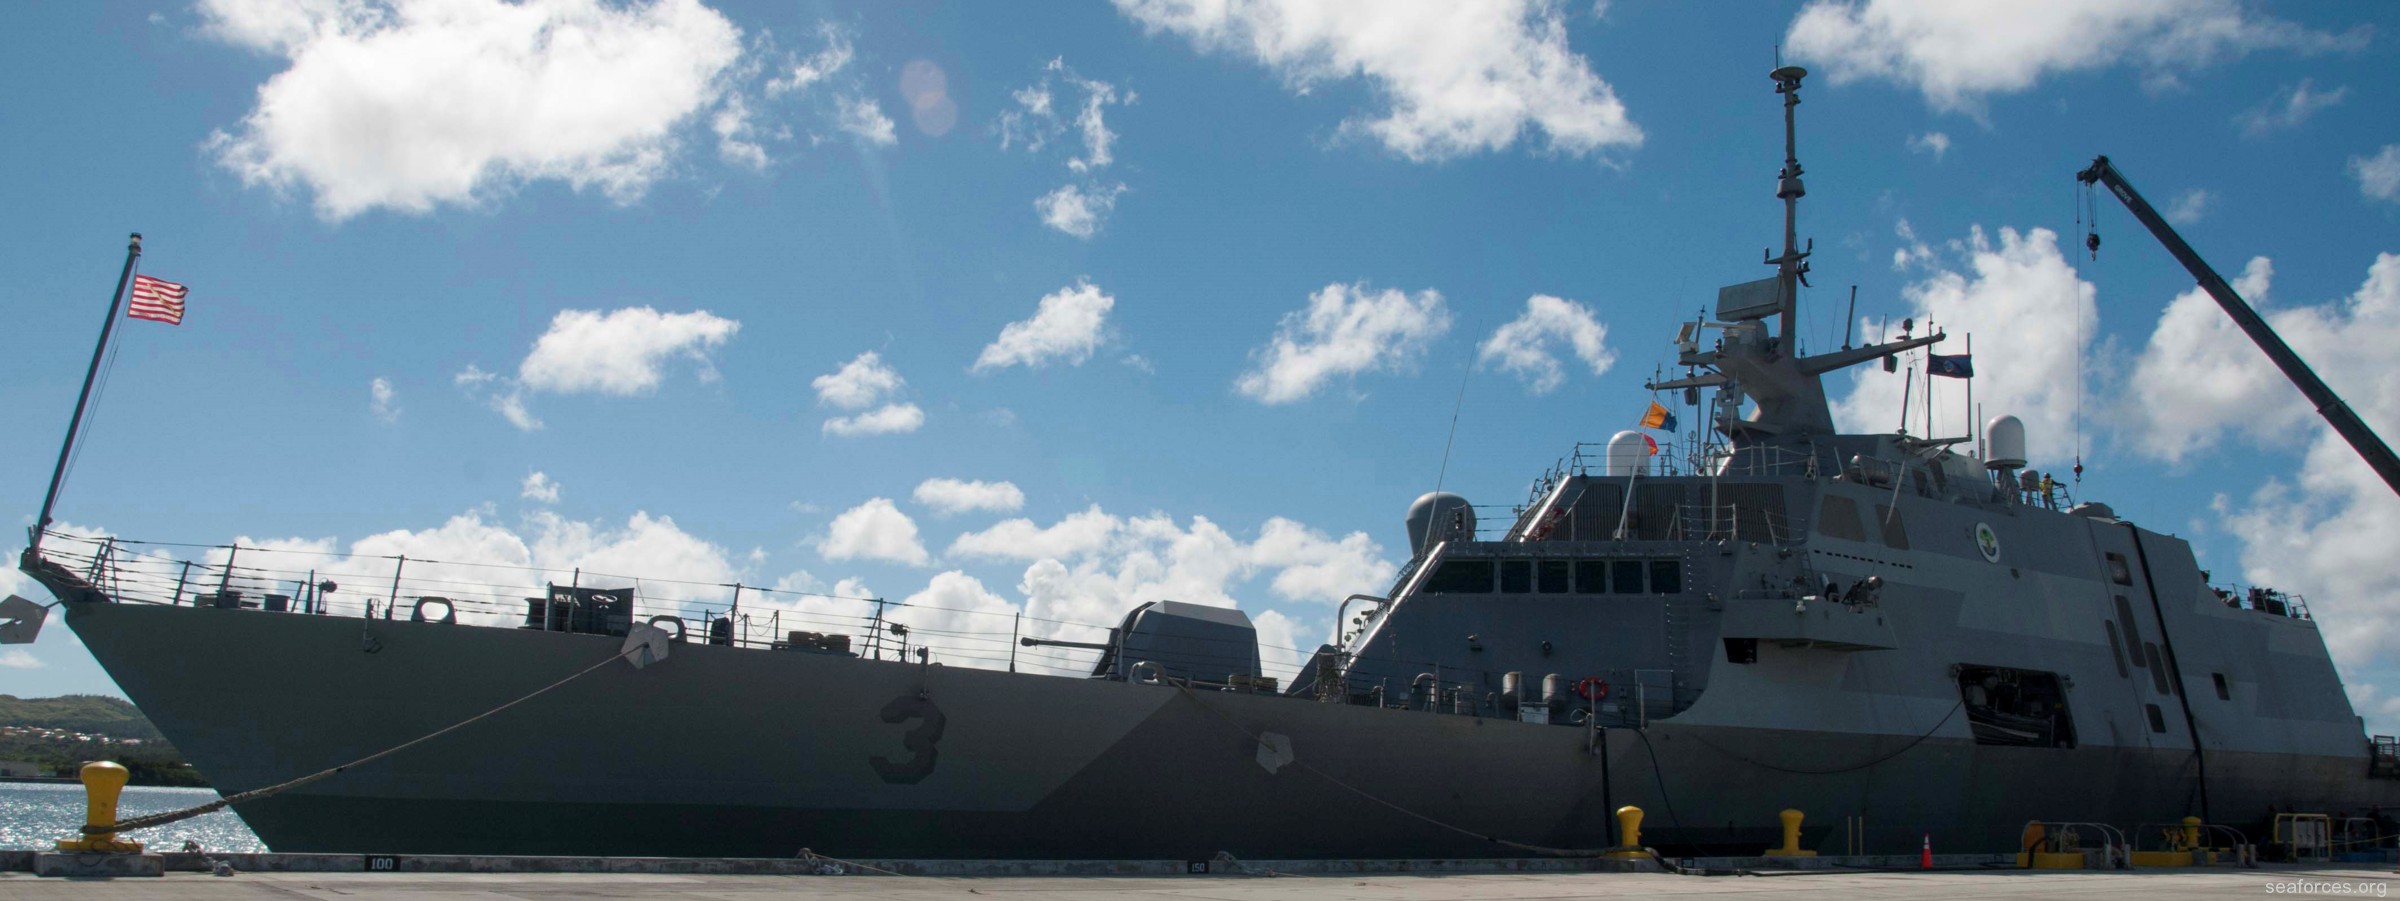 lcs-3 uss fort worth littoral combat ship freedom class us navy 33